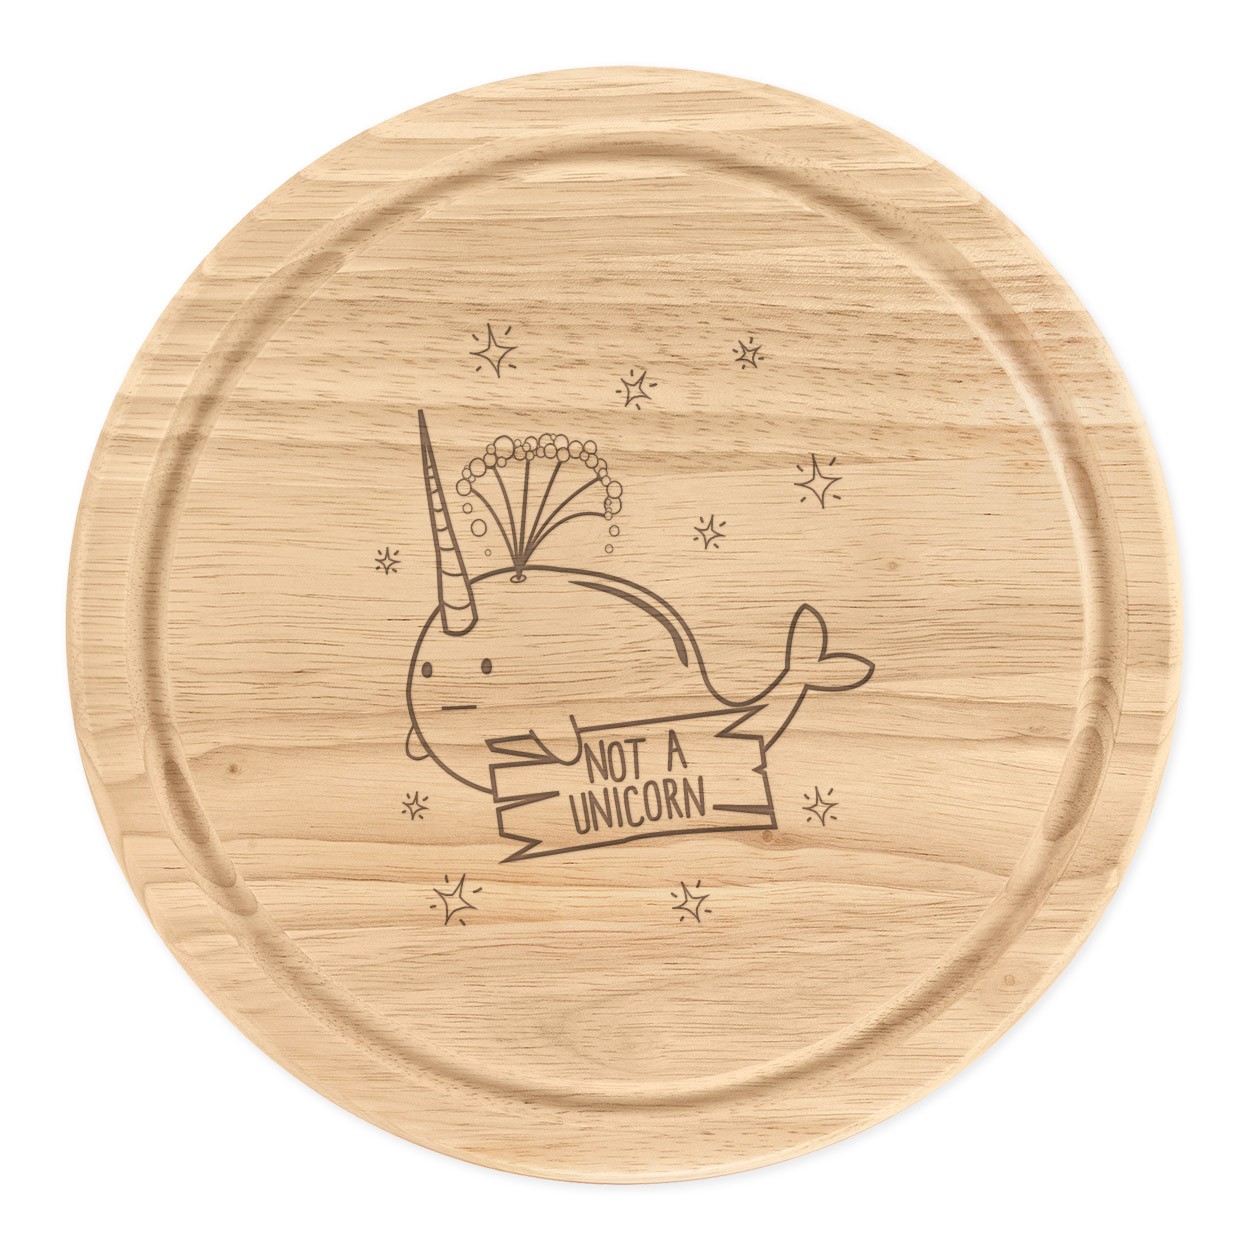 Narwhal Not A Unicorn Wooden Chopping Cheese Board Round 25cm